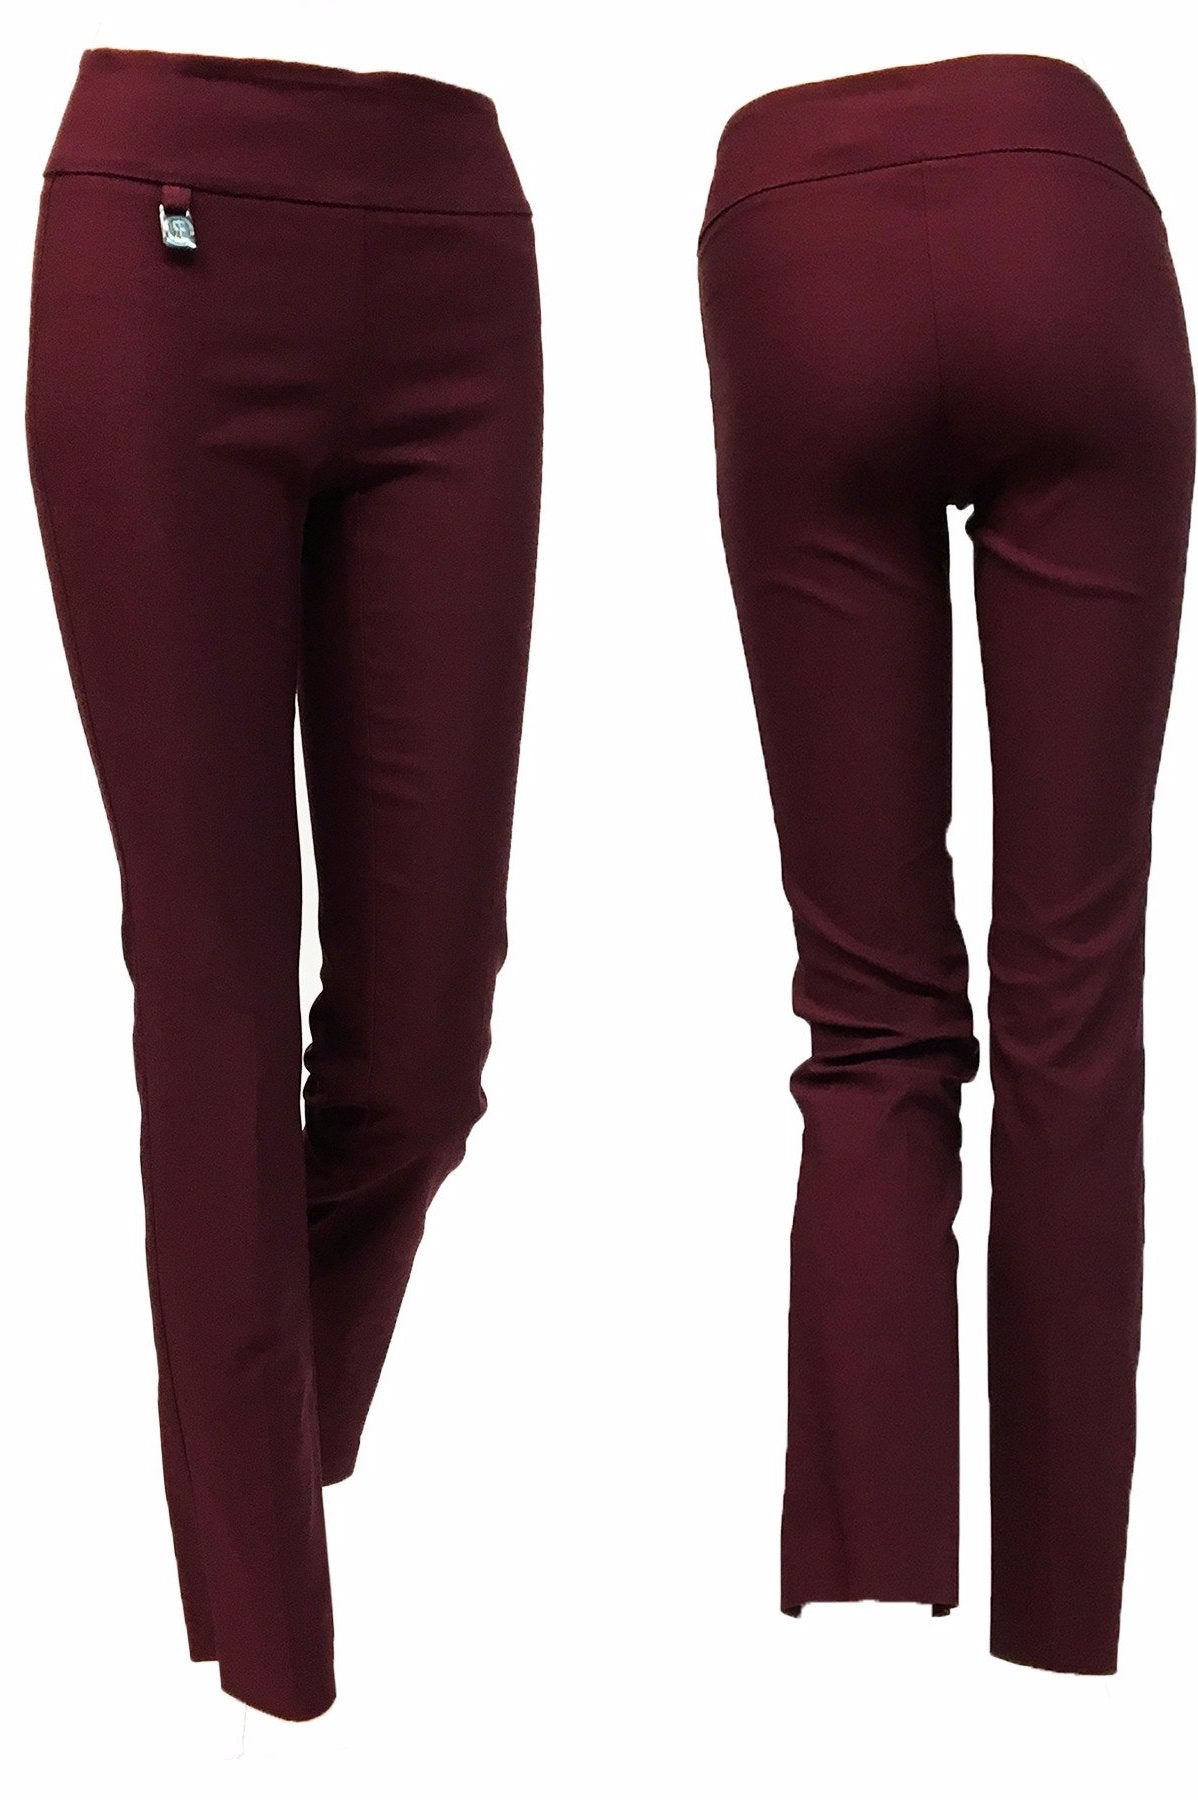 Pin by J & S Mommy on Outfits | Burgundy pants outfit, Maroon pants outfit,  Work outfits women